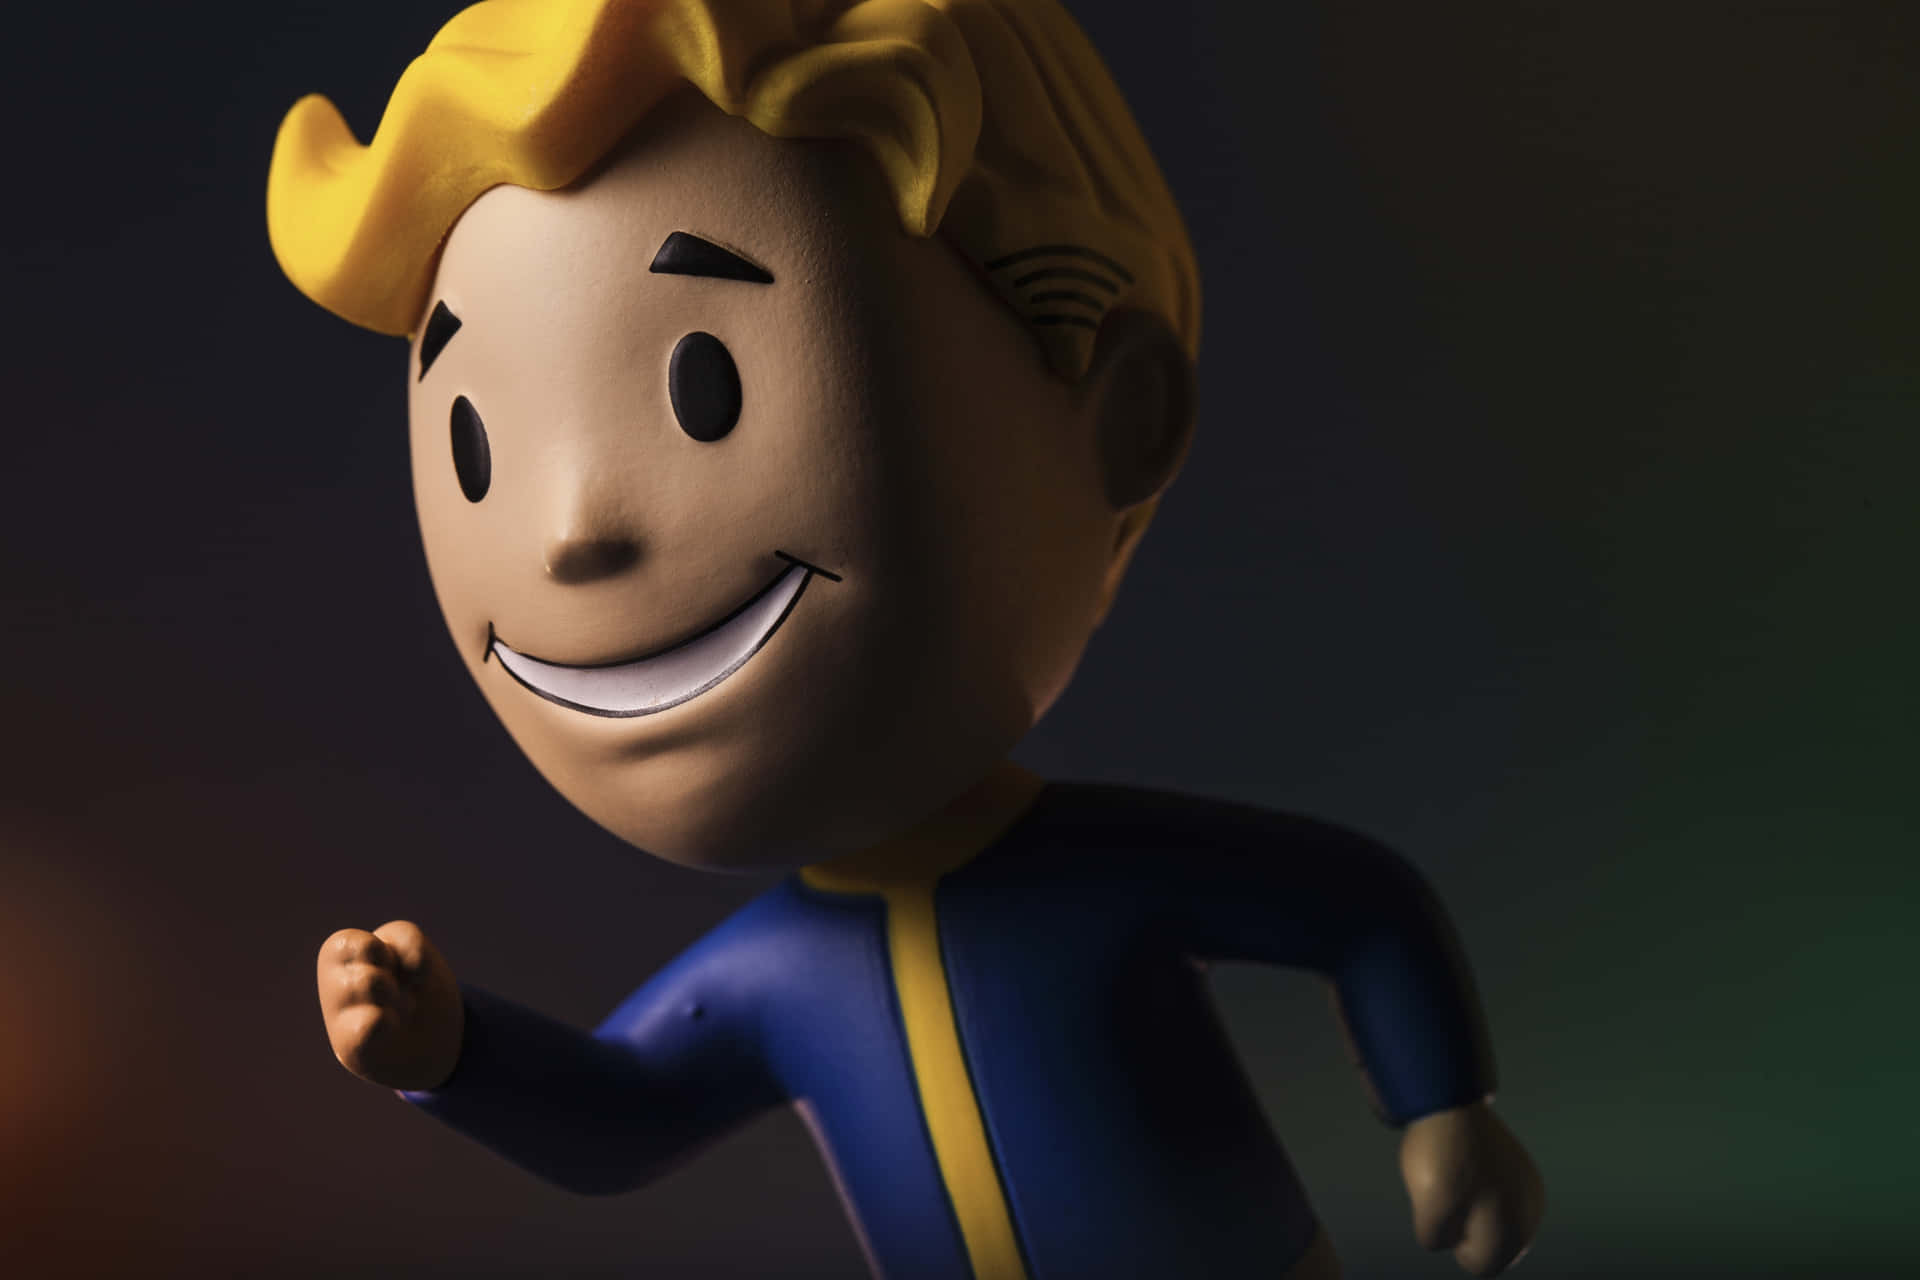 Vault Boy: The cheerful mascot from Fallout Wallpaper